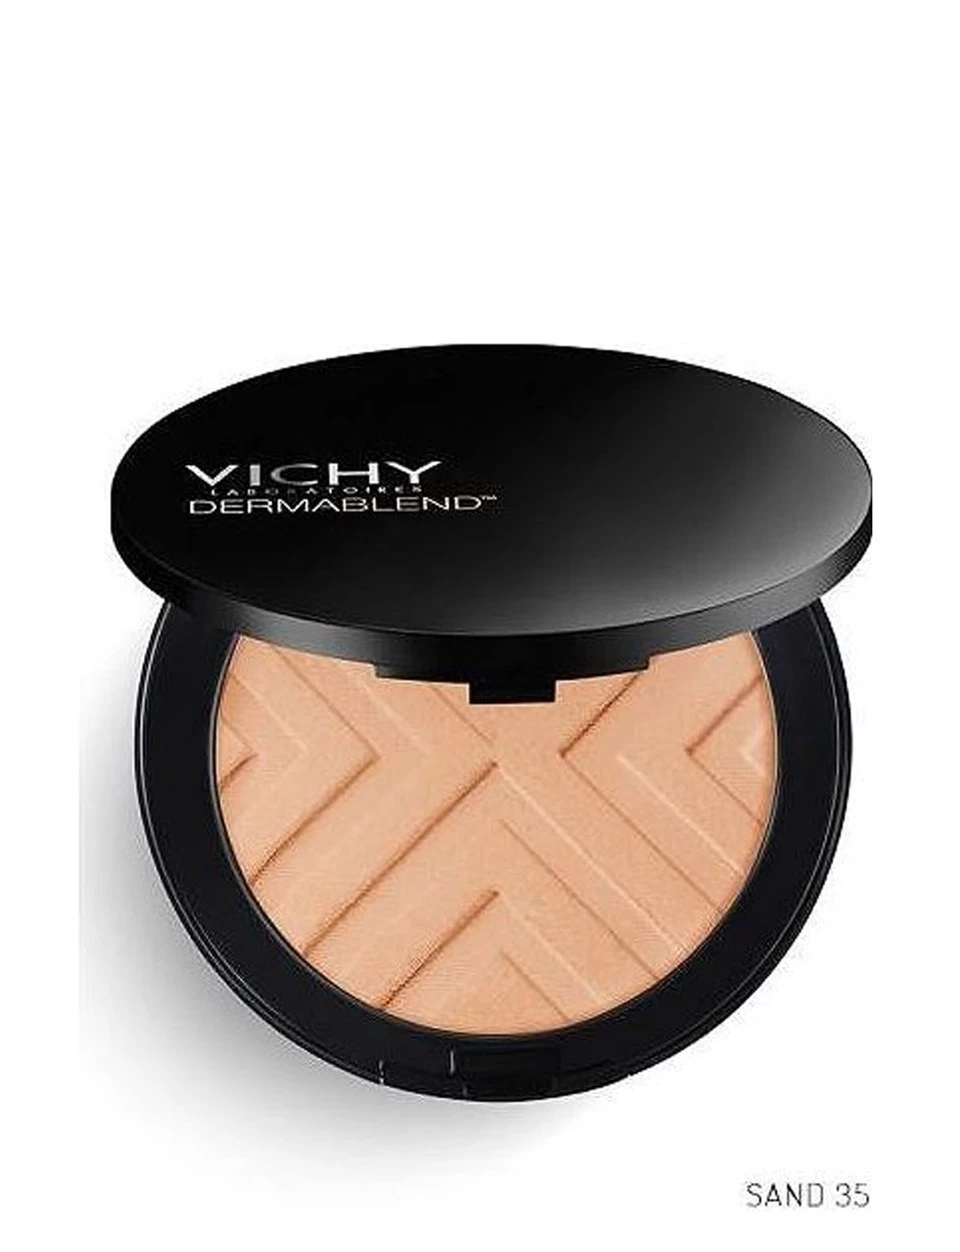 Vichy Dermablend Covermatte 35 Sand Compact Powder Foundation 9.5g